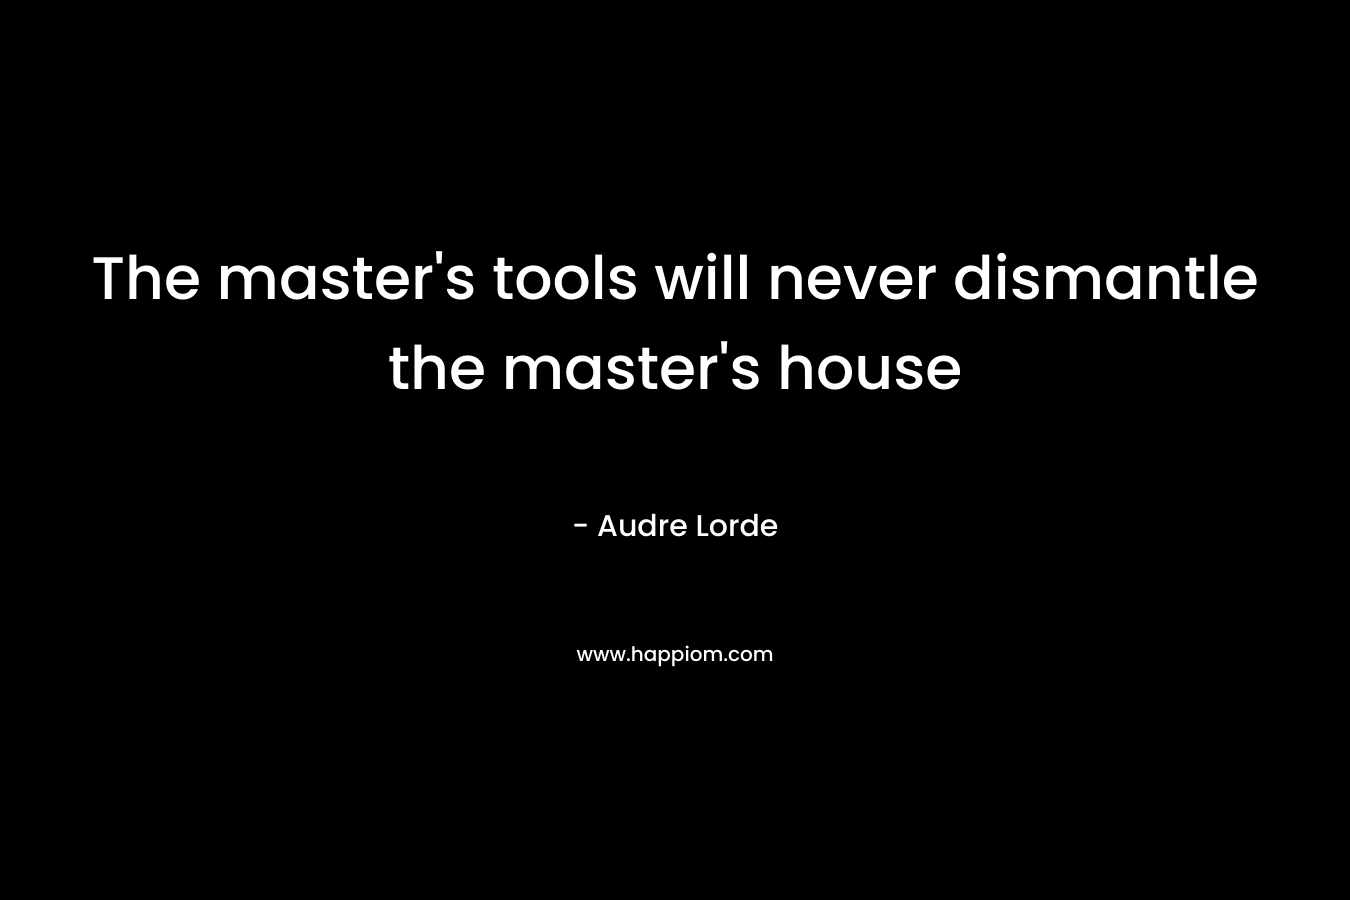 The master's tools will never dismantle the master's house